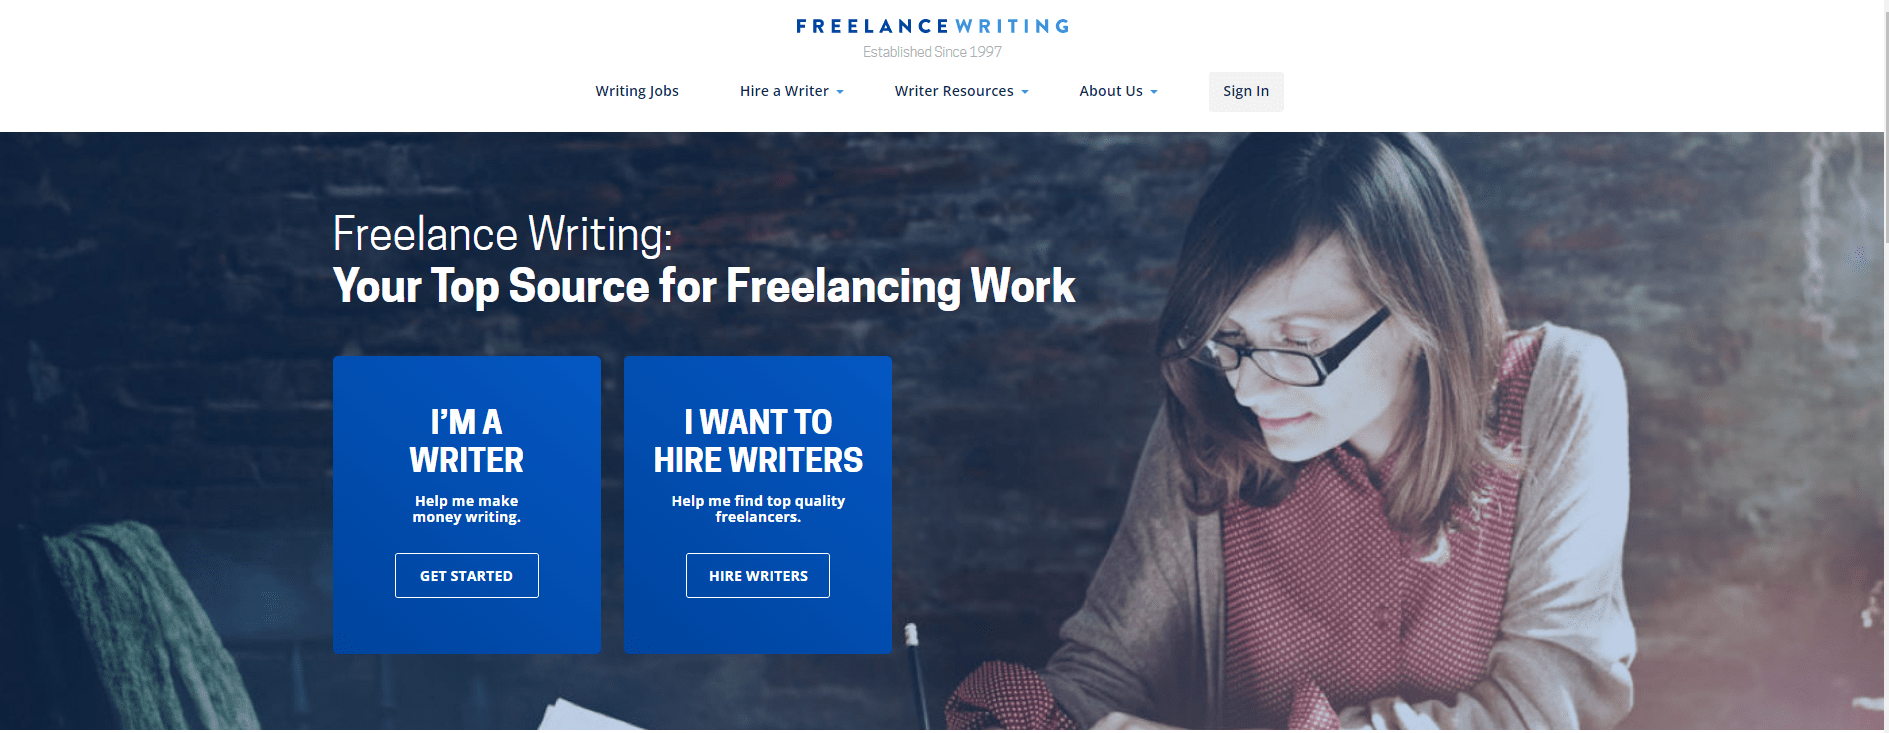 Freelance Writer - How to Become a Freelance Writer